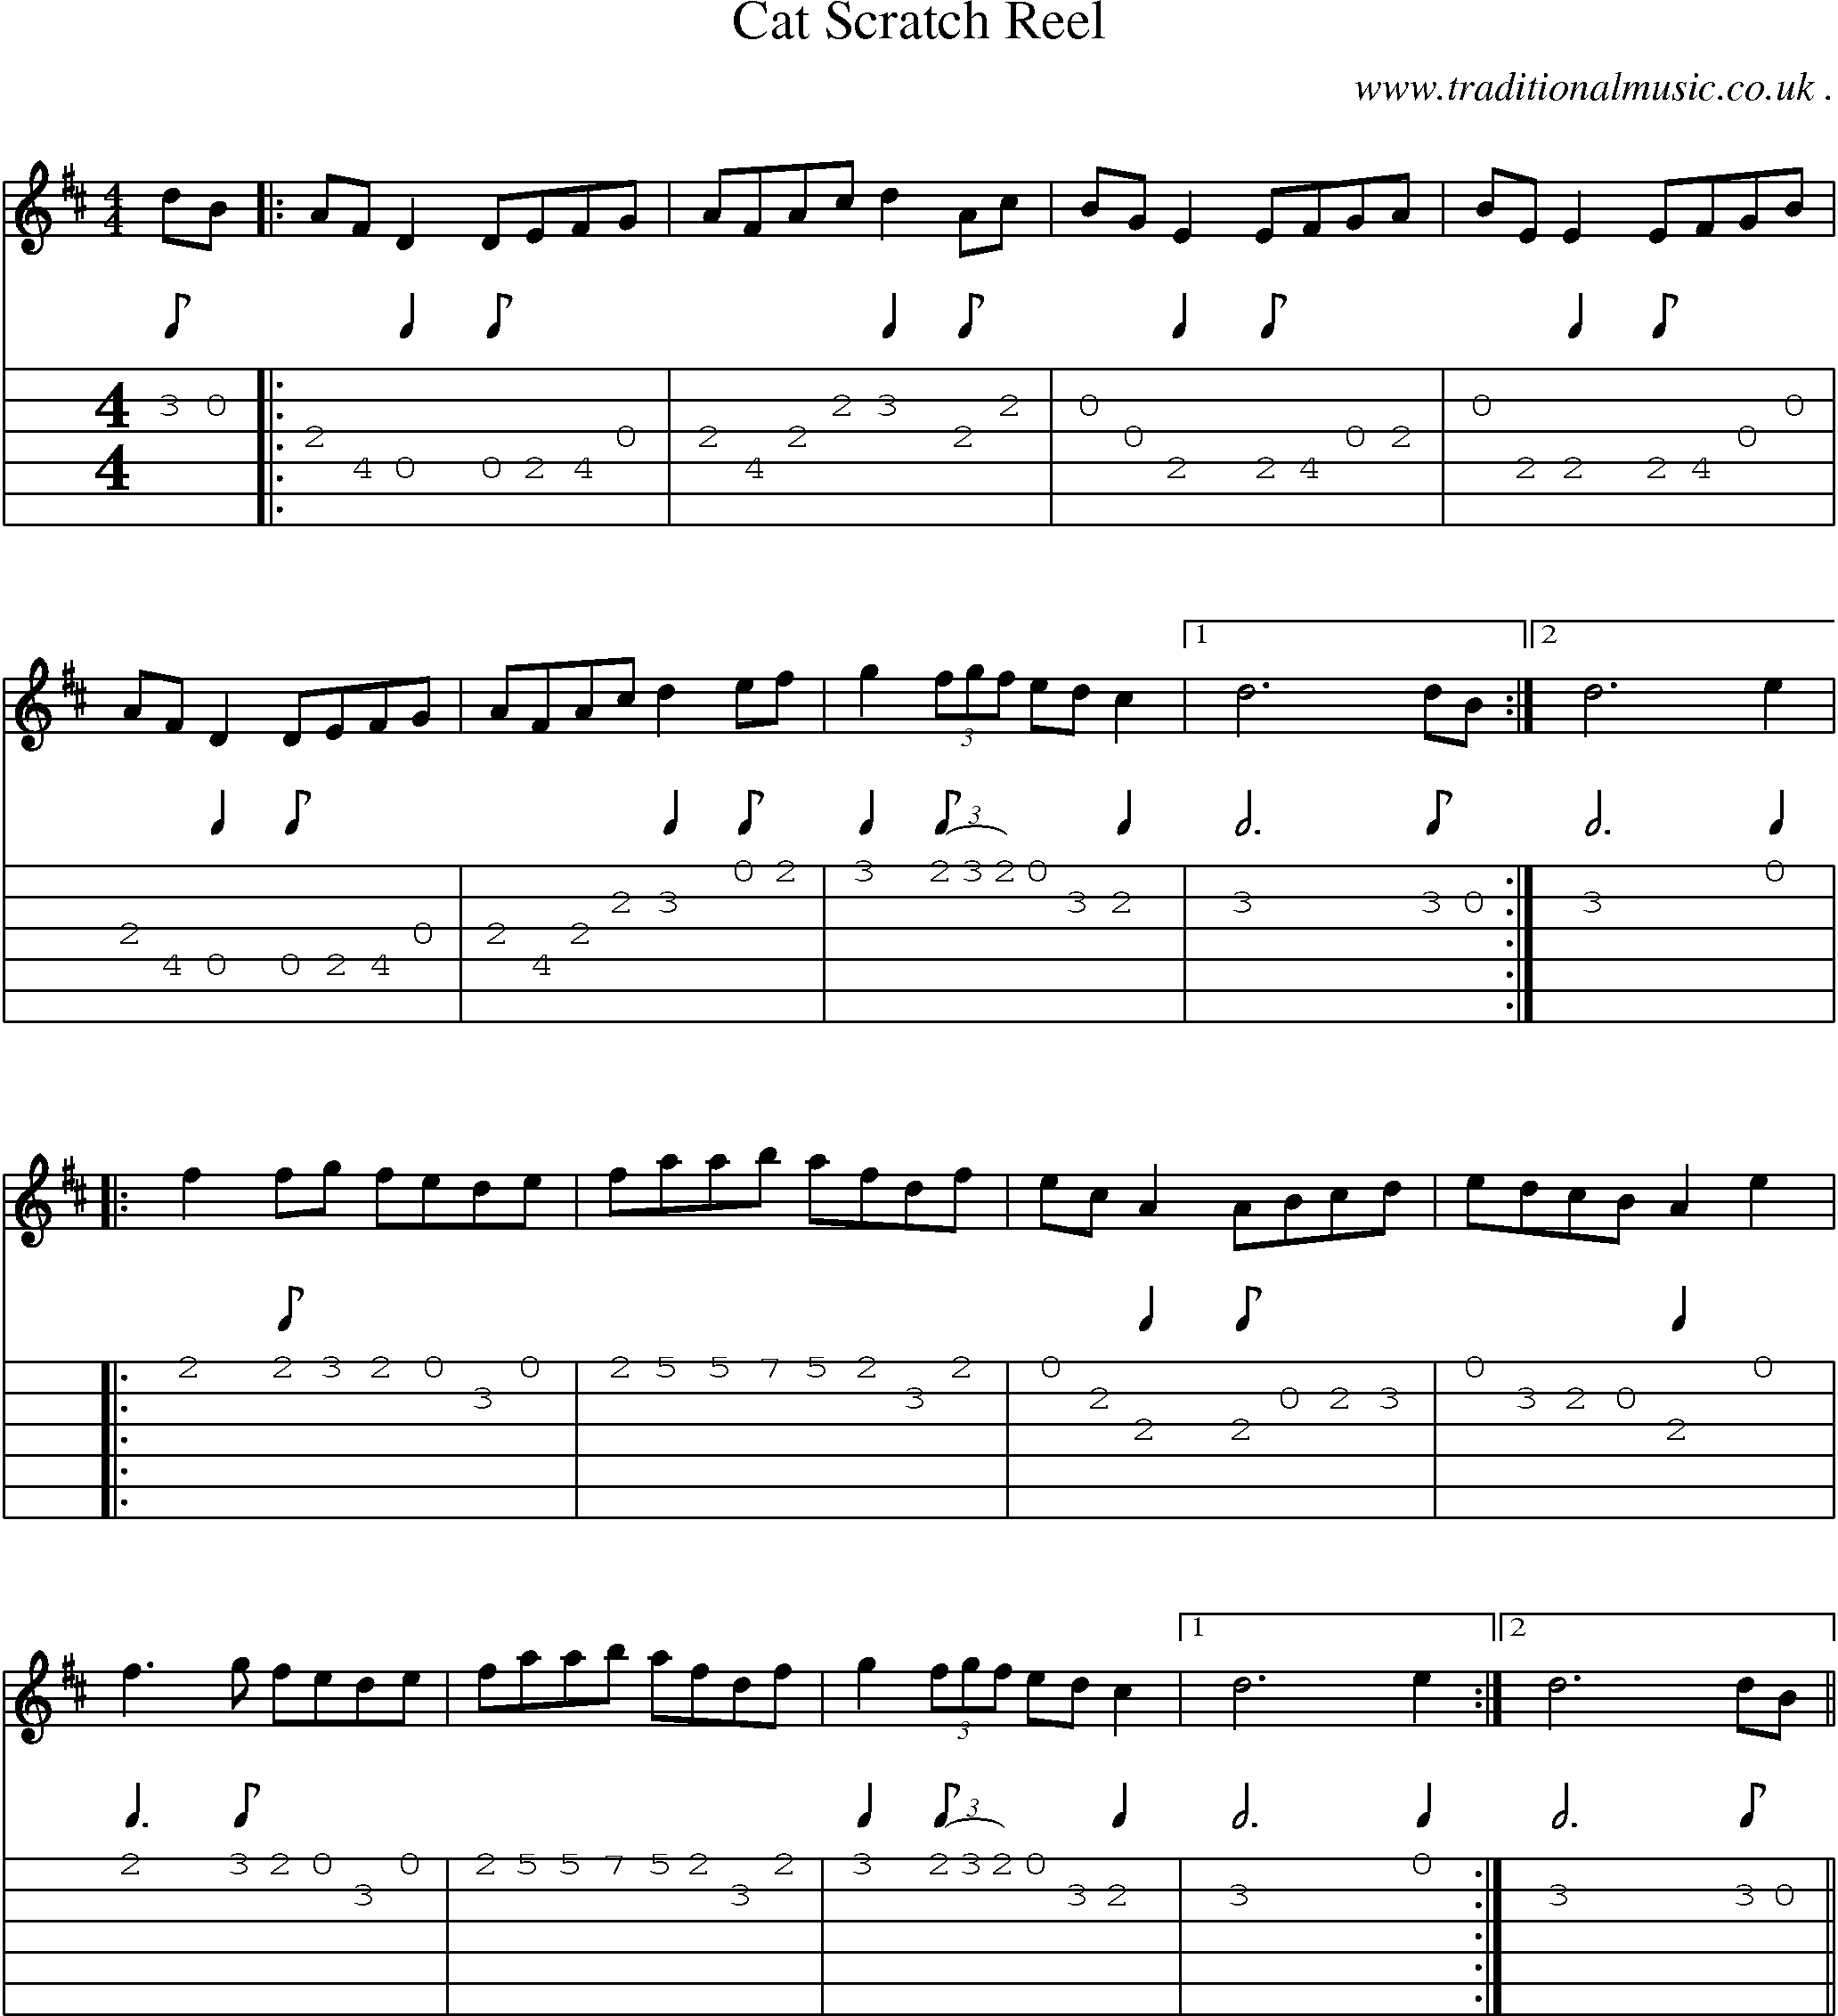 Sheet-Music and Guitar Tabs for Cat Scratch Reel